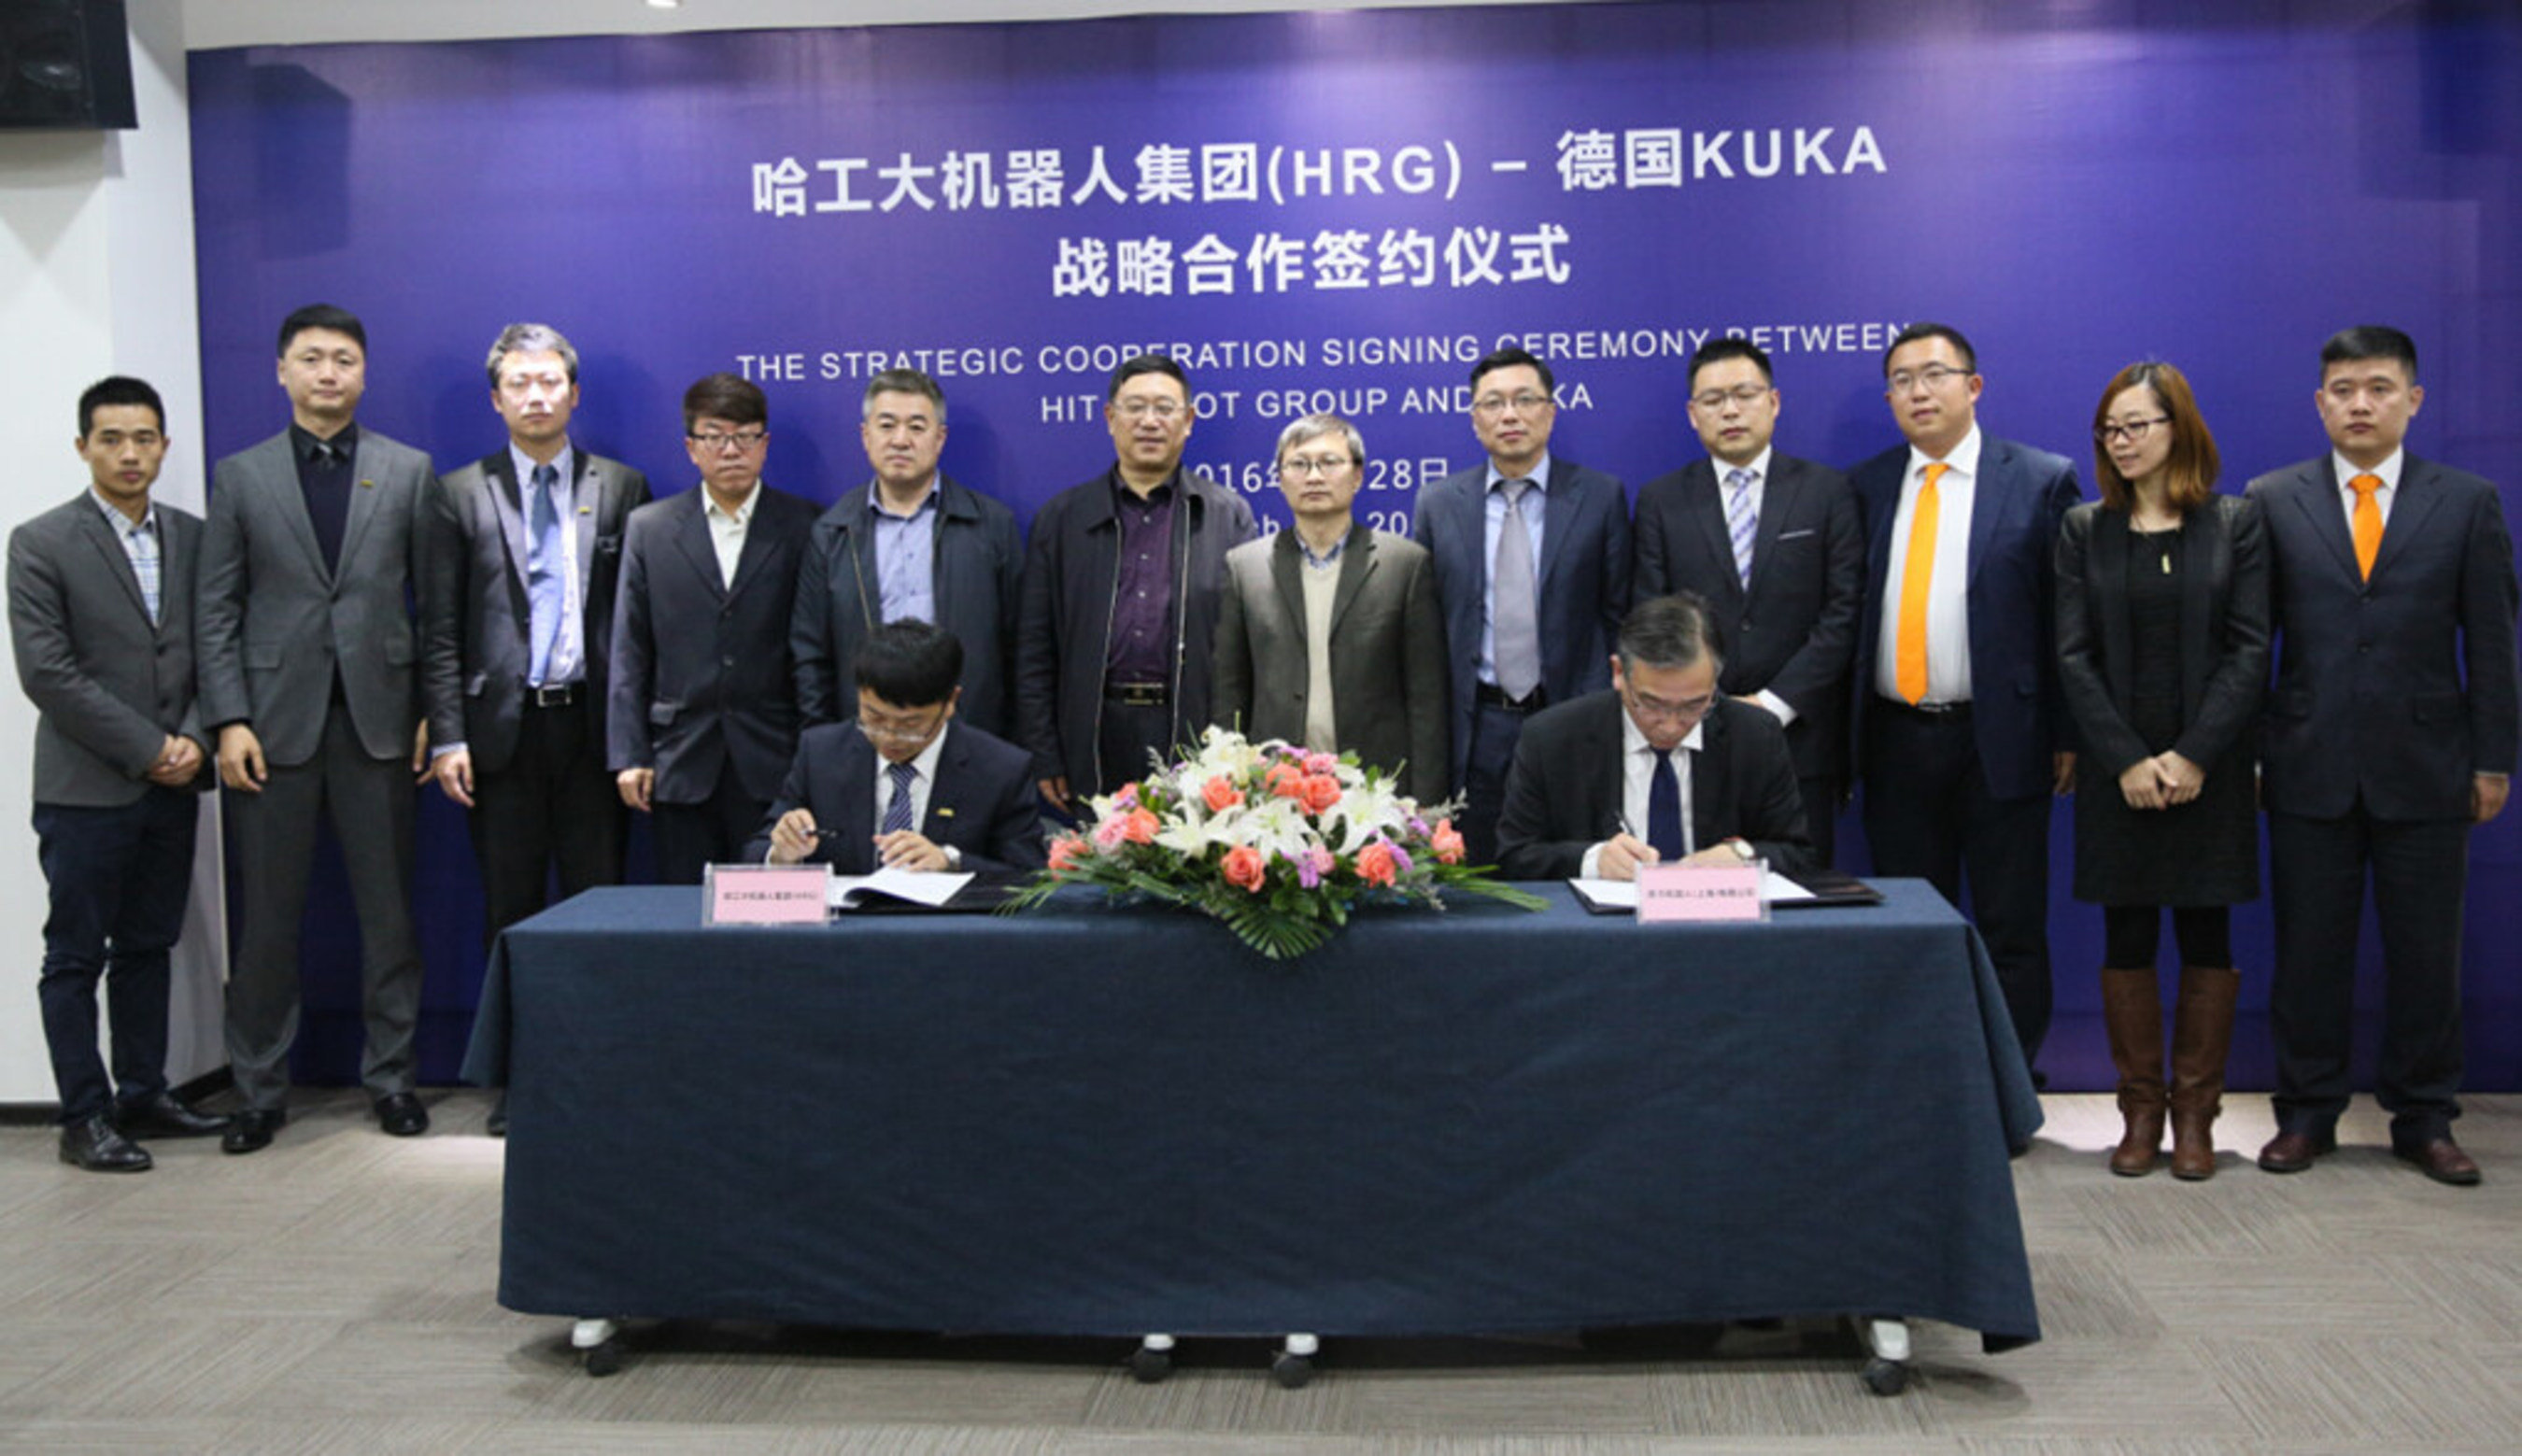 The Strategic Cooperation Signing Ceremony between HIT Robot Group (HRG) and KUKA